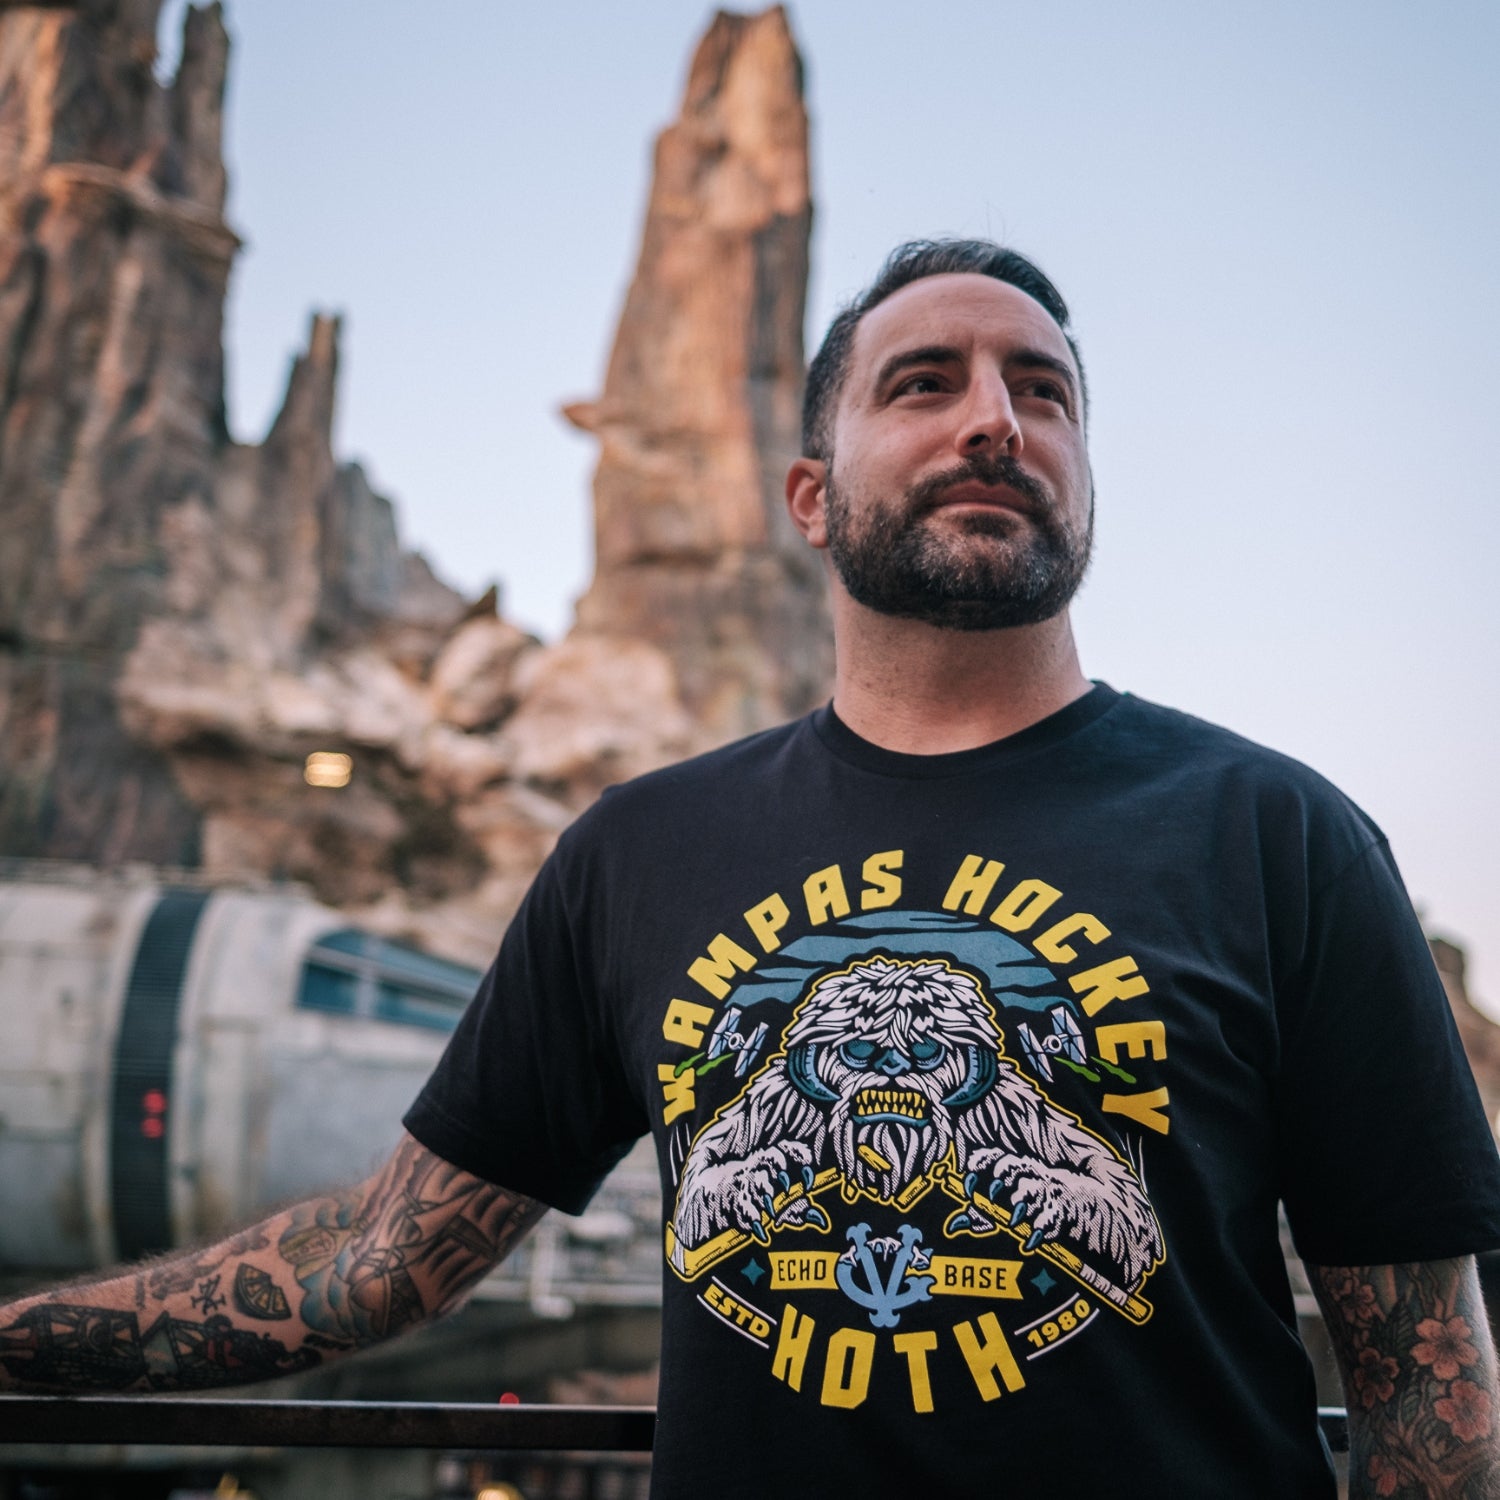 violent gentlemen hockey clothing company hockey club new star wars may the 4th releases - new Hoth hockey jersey, Hoth Star Wars Wampa t-shirt, tee, hoodie, and hockey socks. Learn more by checking out Violent Gentlemen Hockey Apparel